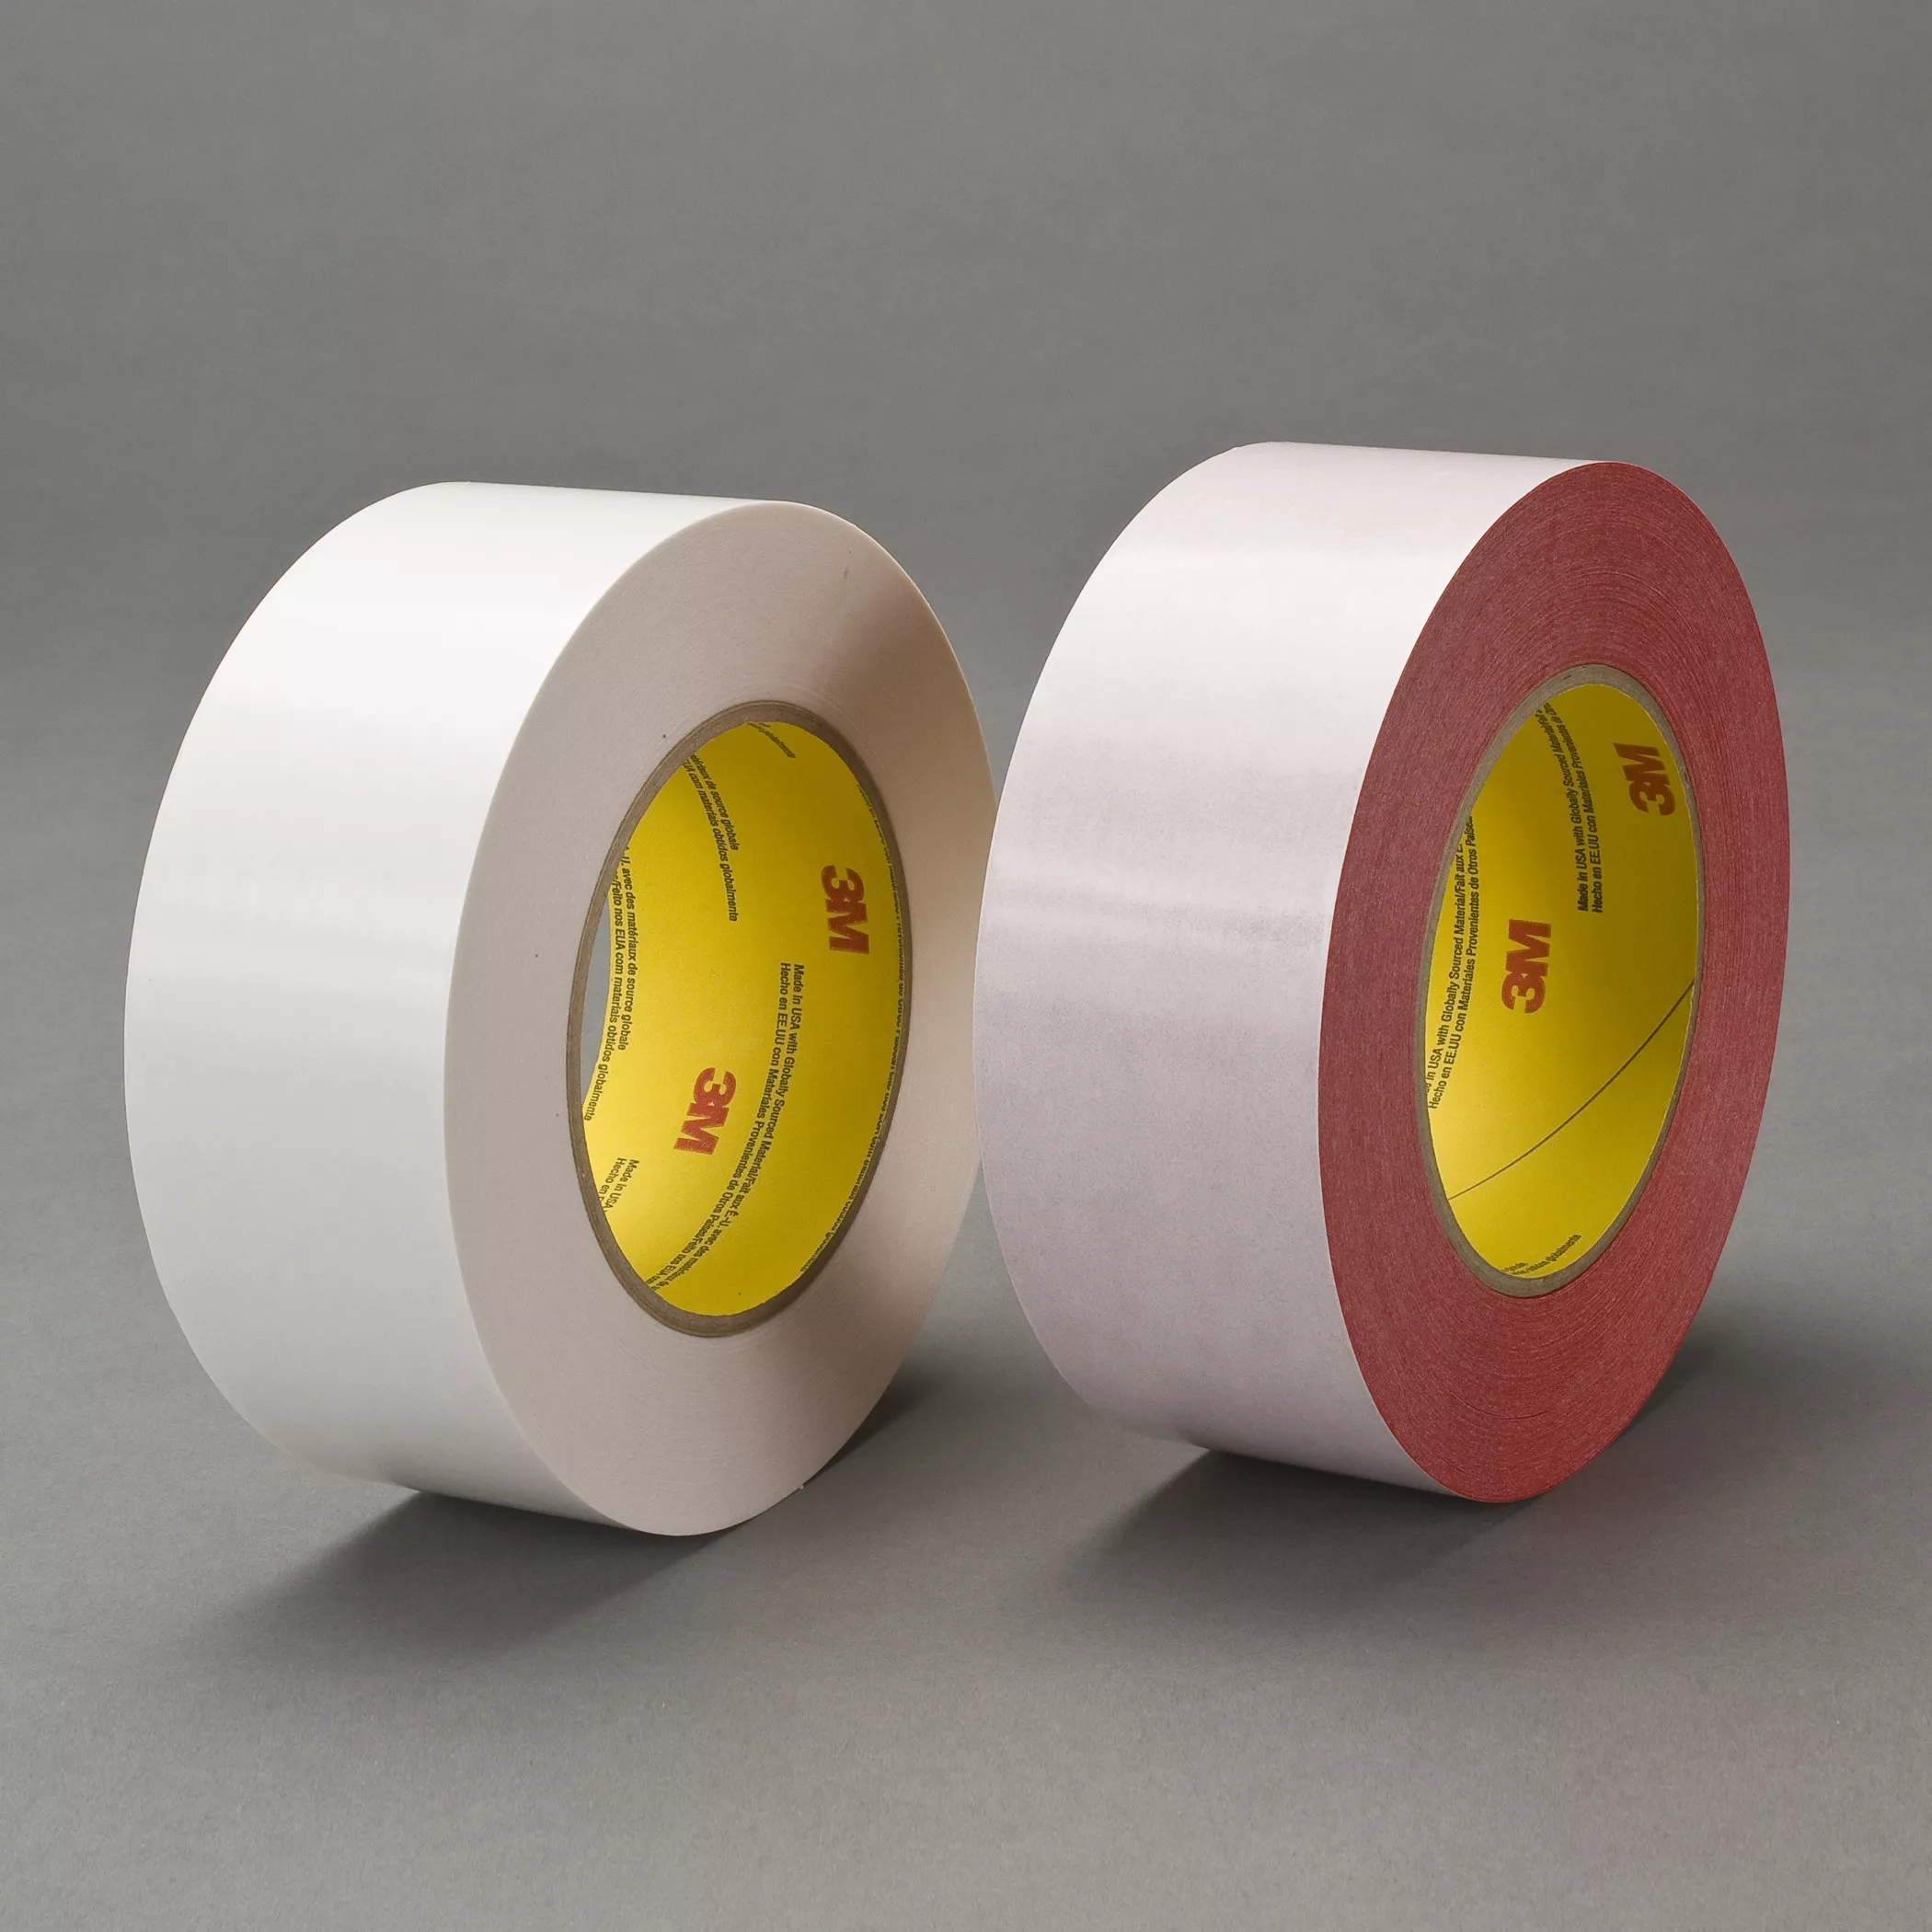 3M™ Double Coated Tape 9738R, Red, Japan Label, 48 mm x 55 m, 4.3 mil, 24 Rolls/Case